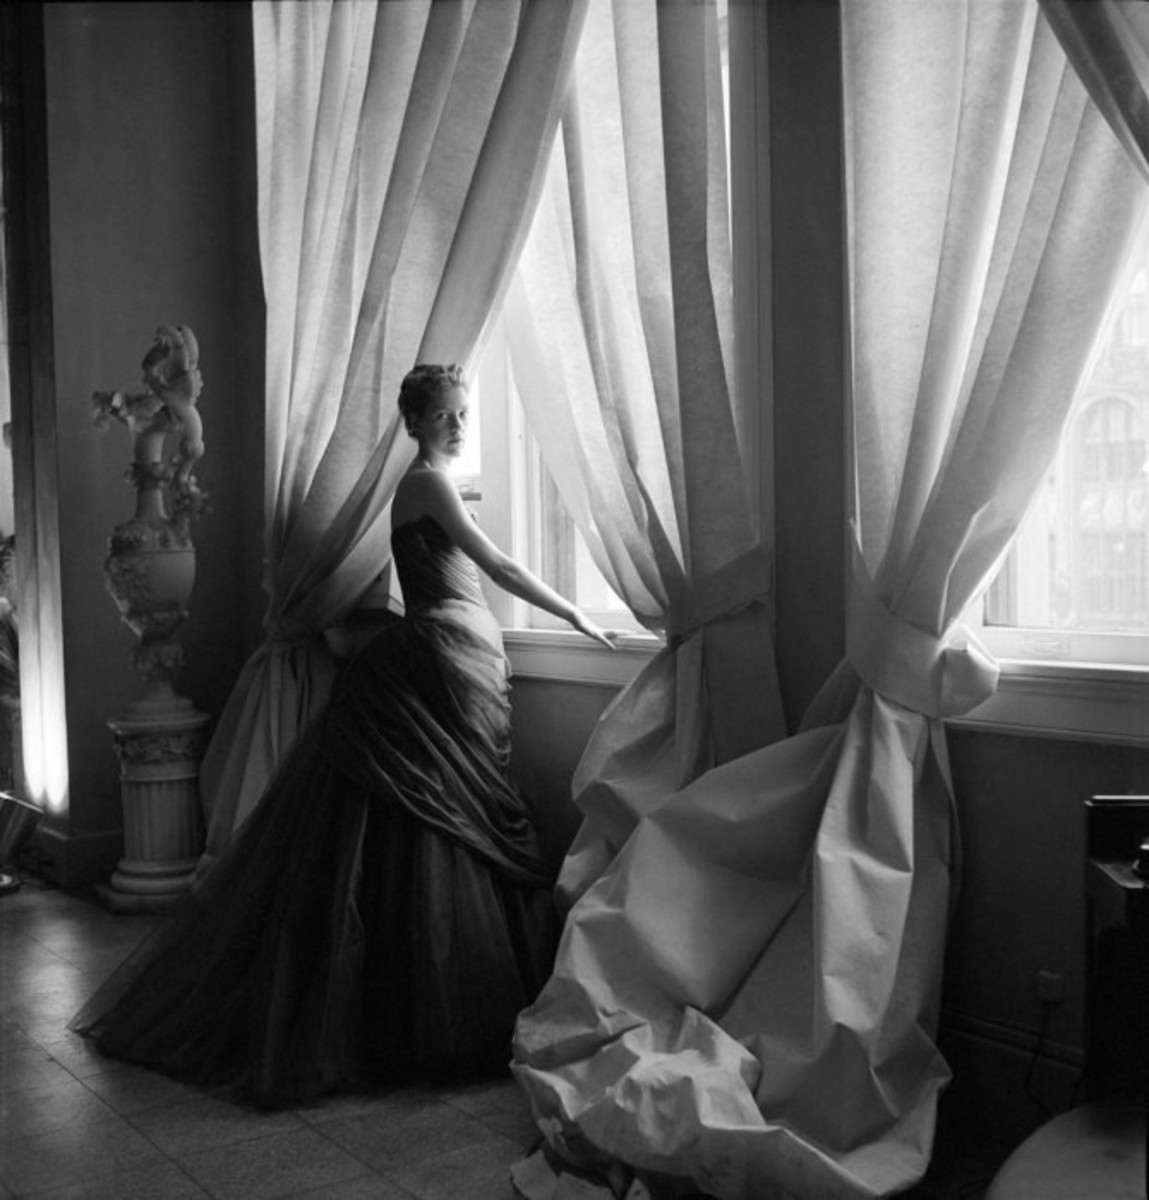 The Swan ball gown immortalized in this Cecil Beaton photograph of Charles James’ wife, Nancy James, posing by light-filled Pellon-covered windows in the James’ showroom.